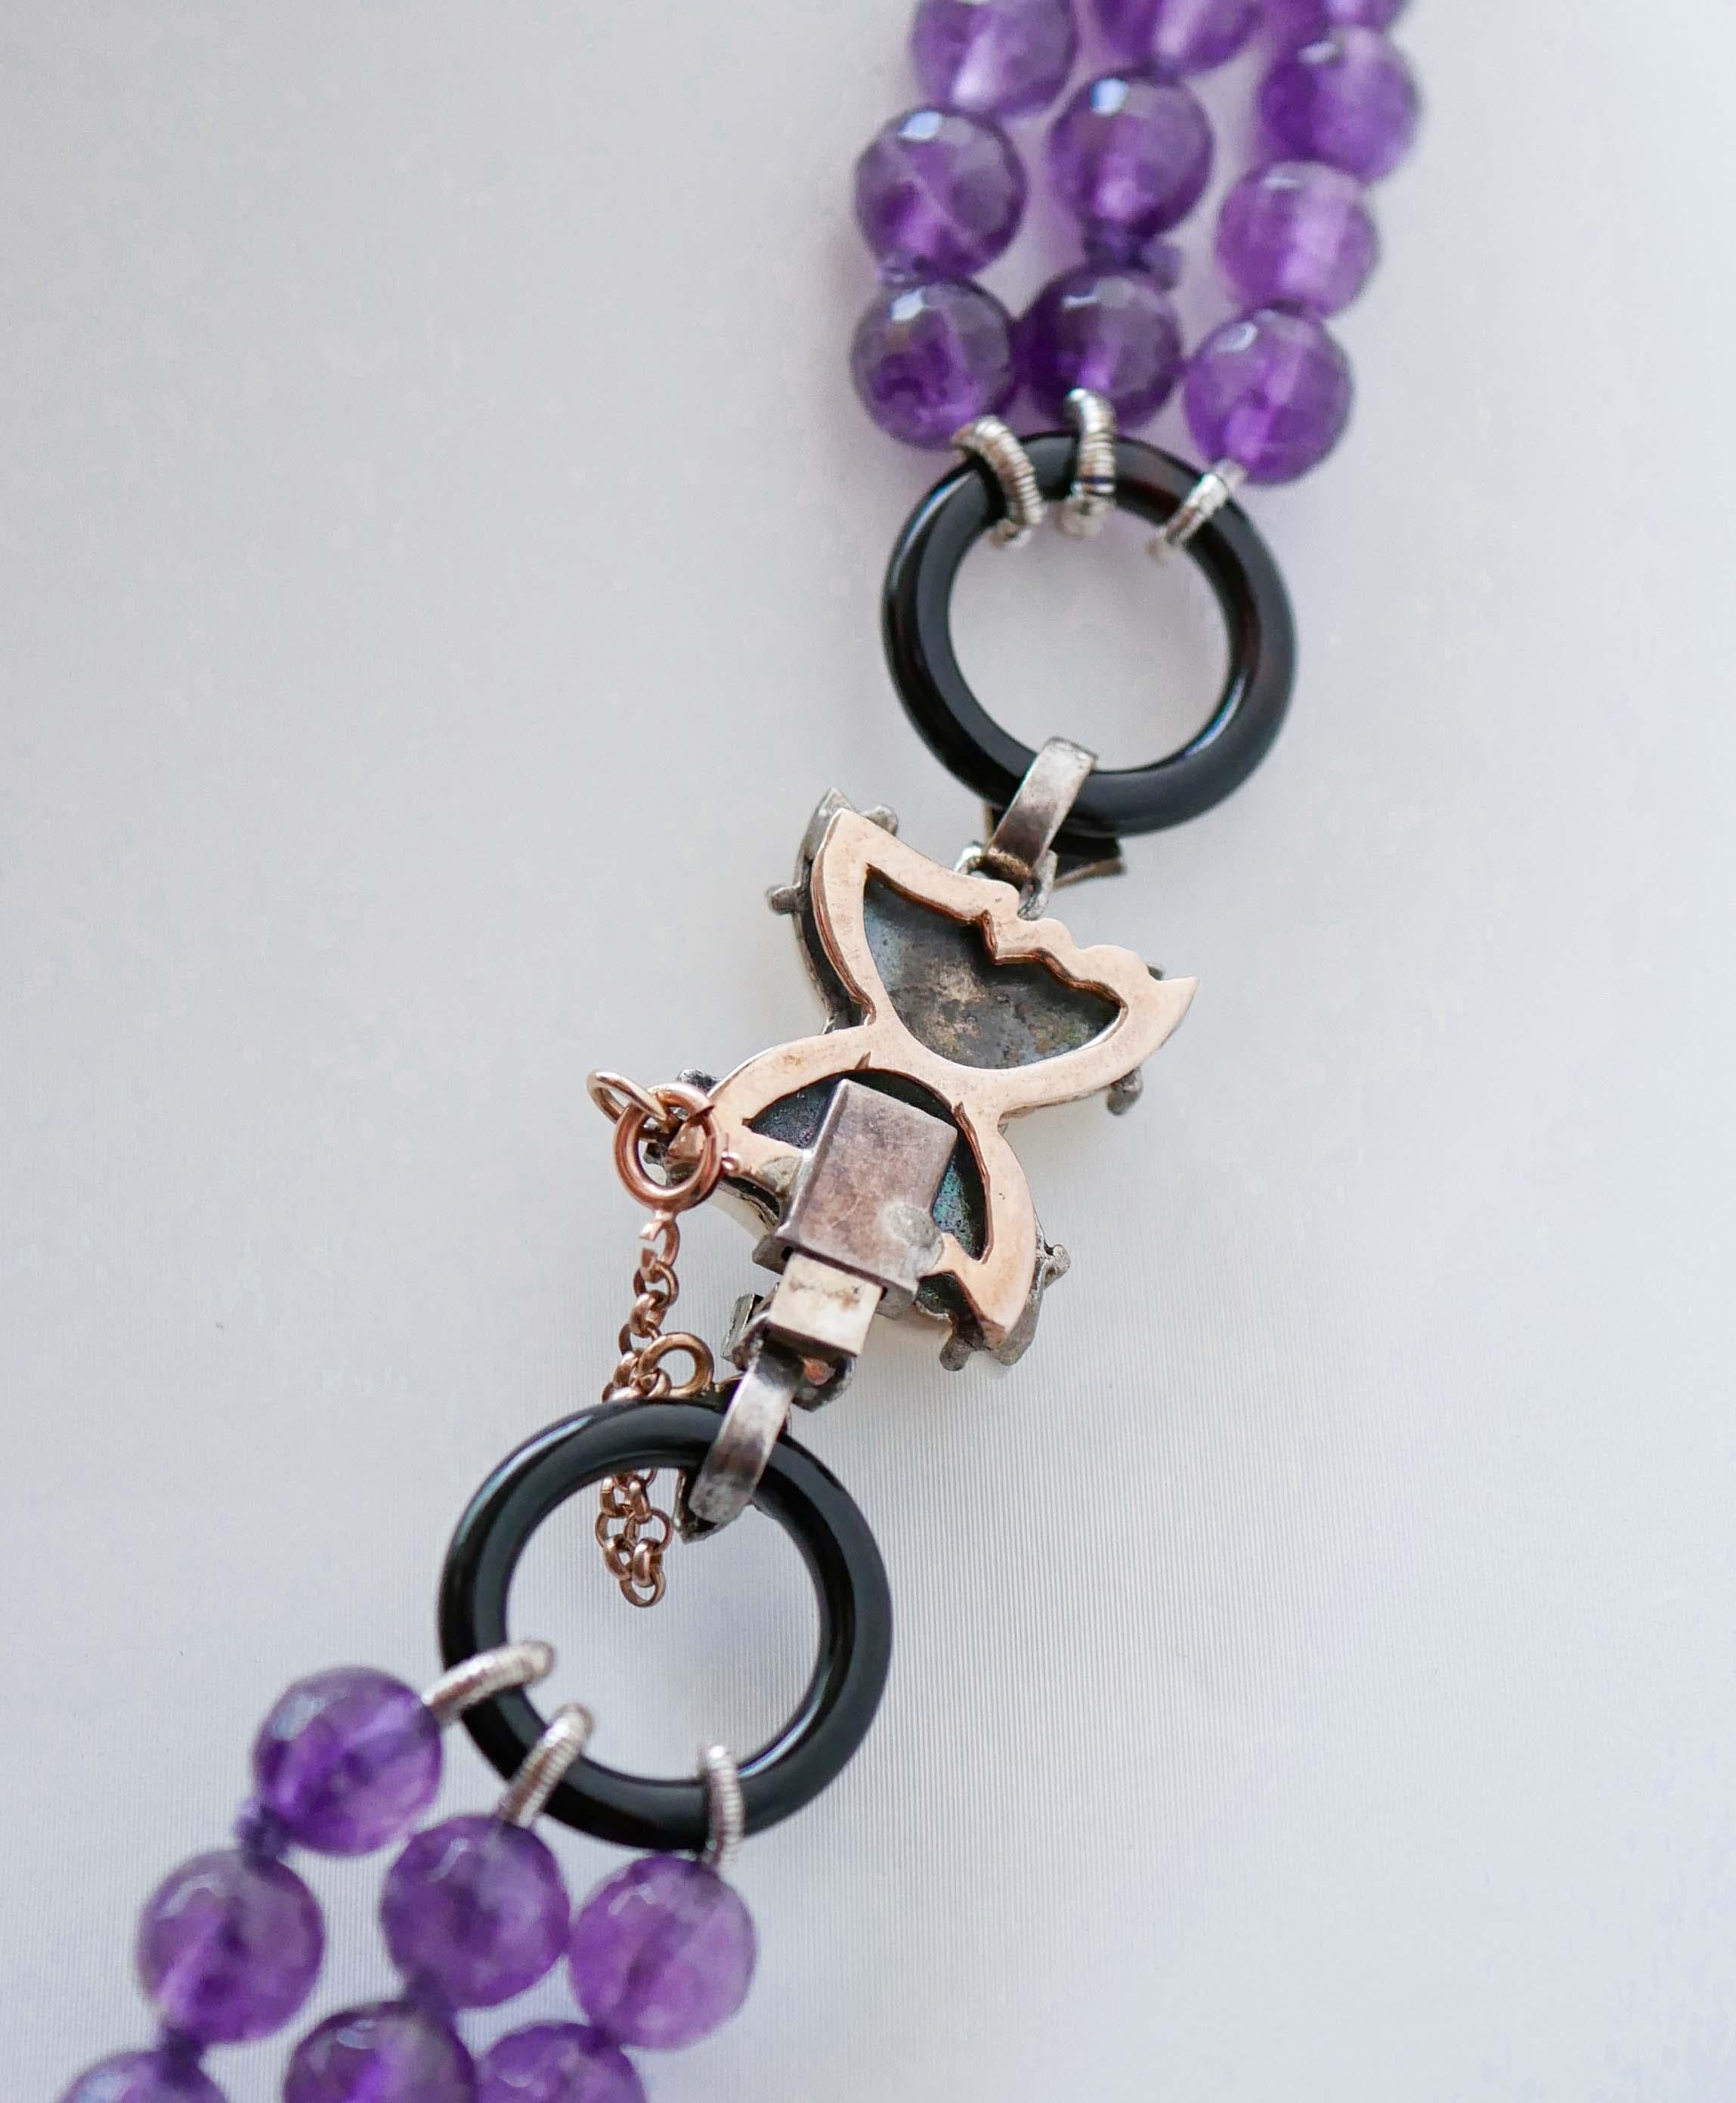 Mixed Cut Amethysts, White Stones, Rubies, Onyx, Rose Gold and Silver Retrò Necklace For Sale